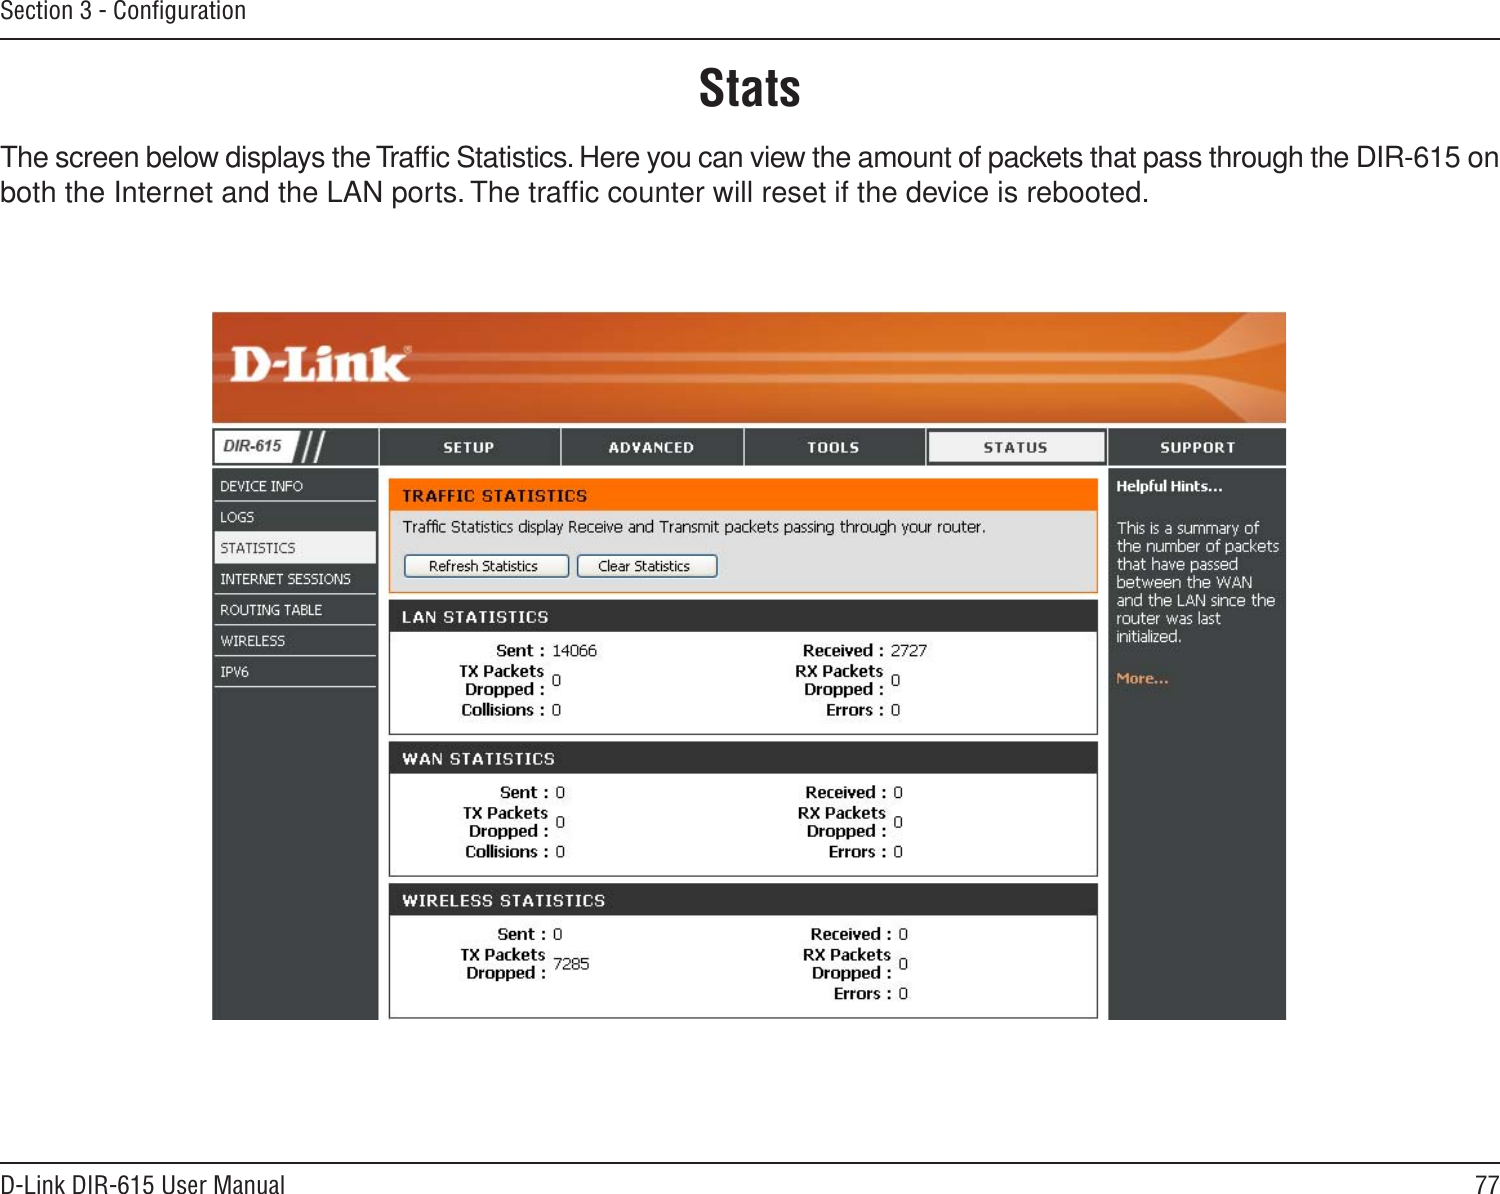 77D-Link DIR-615 User ManualSection 3 - ConﬁgurationStatsThe screen below displays the Trafﬁc Statistics. Here you can view the amount of packets that pass through the DIR-615 on both the Internet and the LAN ports. The trafﬁc counter will reset if the device is rebooted.